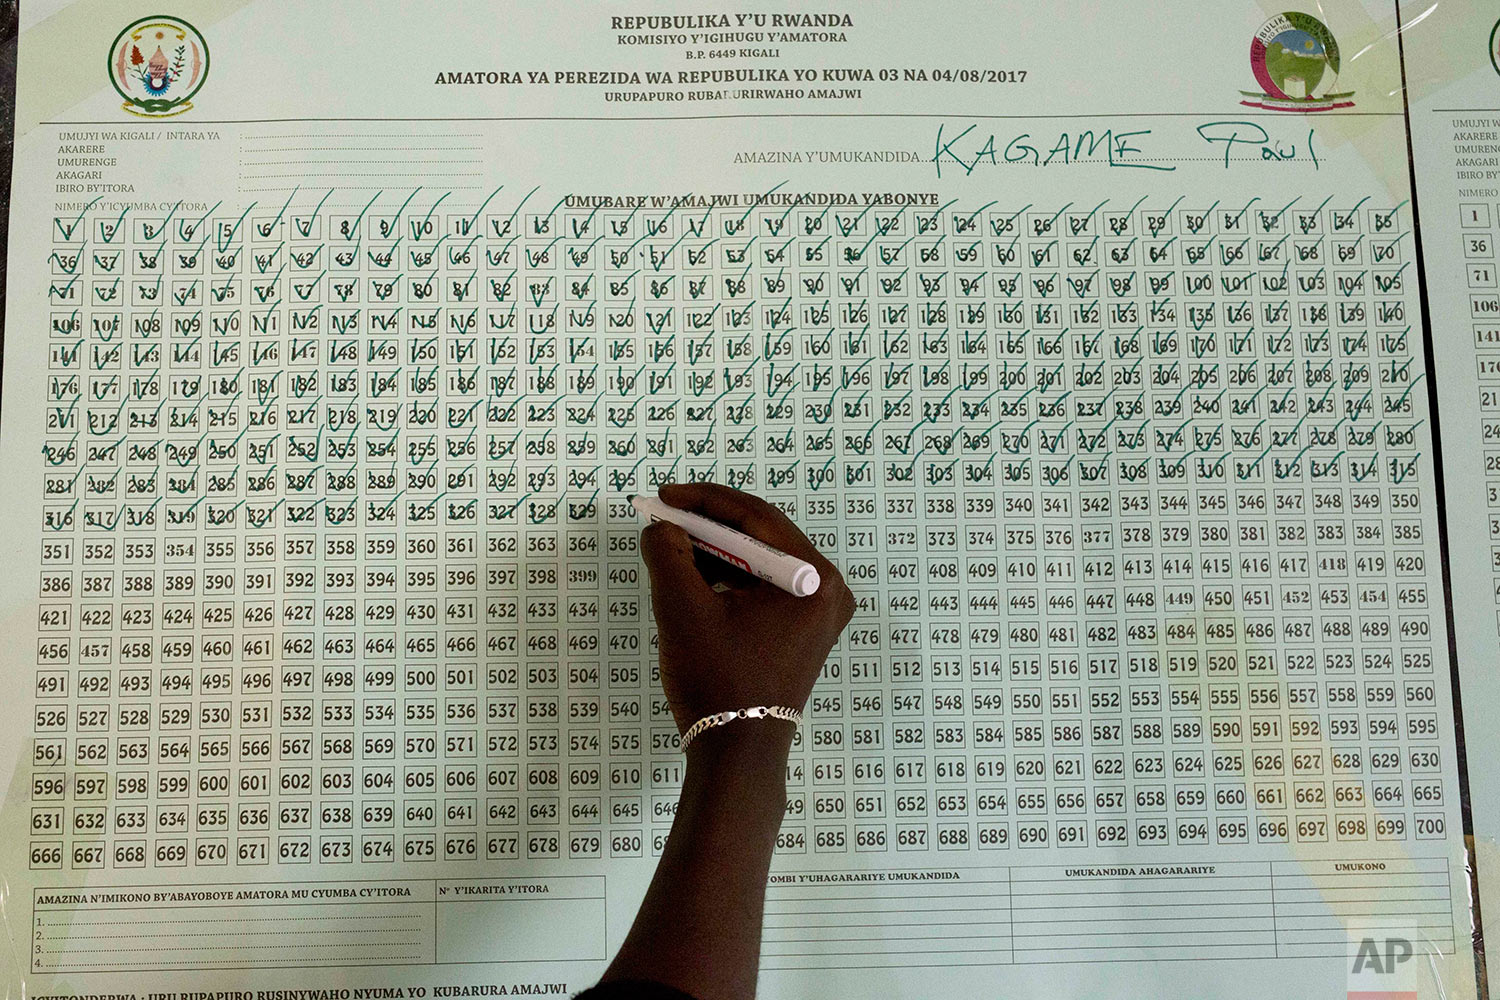  Vote count starts in a polling station in Rwanda's capital Kigali Friday Aug. 4, 2017, for the presidential elections. Rwandans voted in an election Friday that the country's longtime president is widely expected to win, after the government disqual